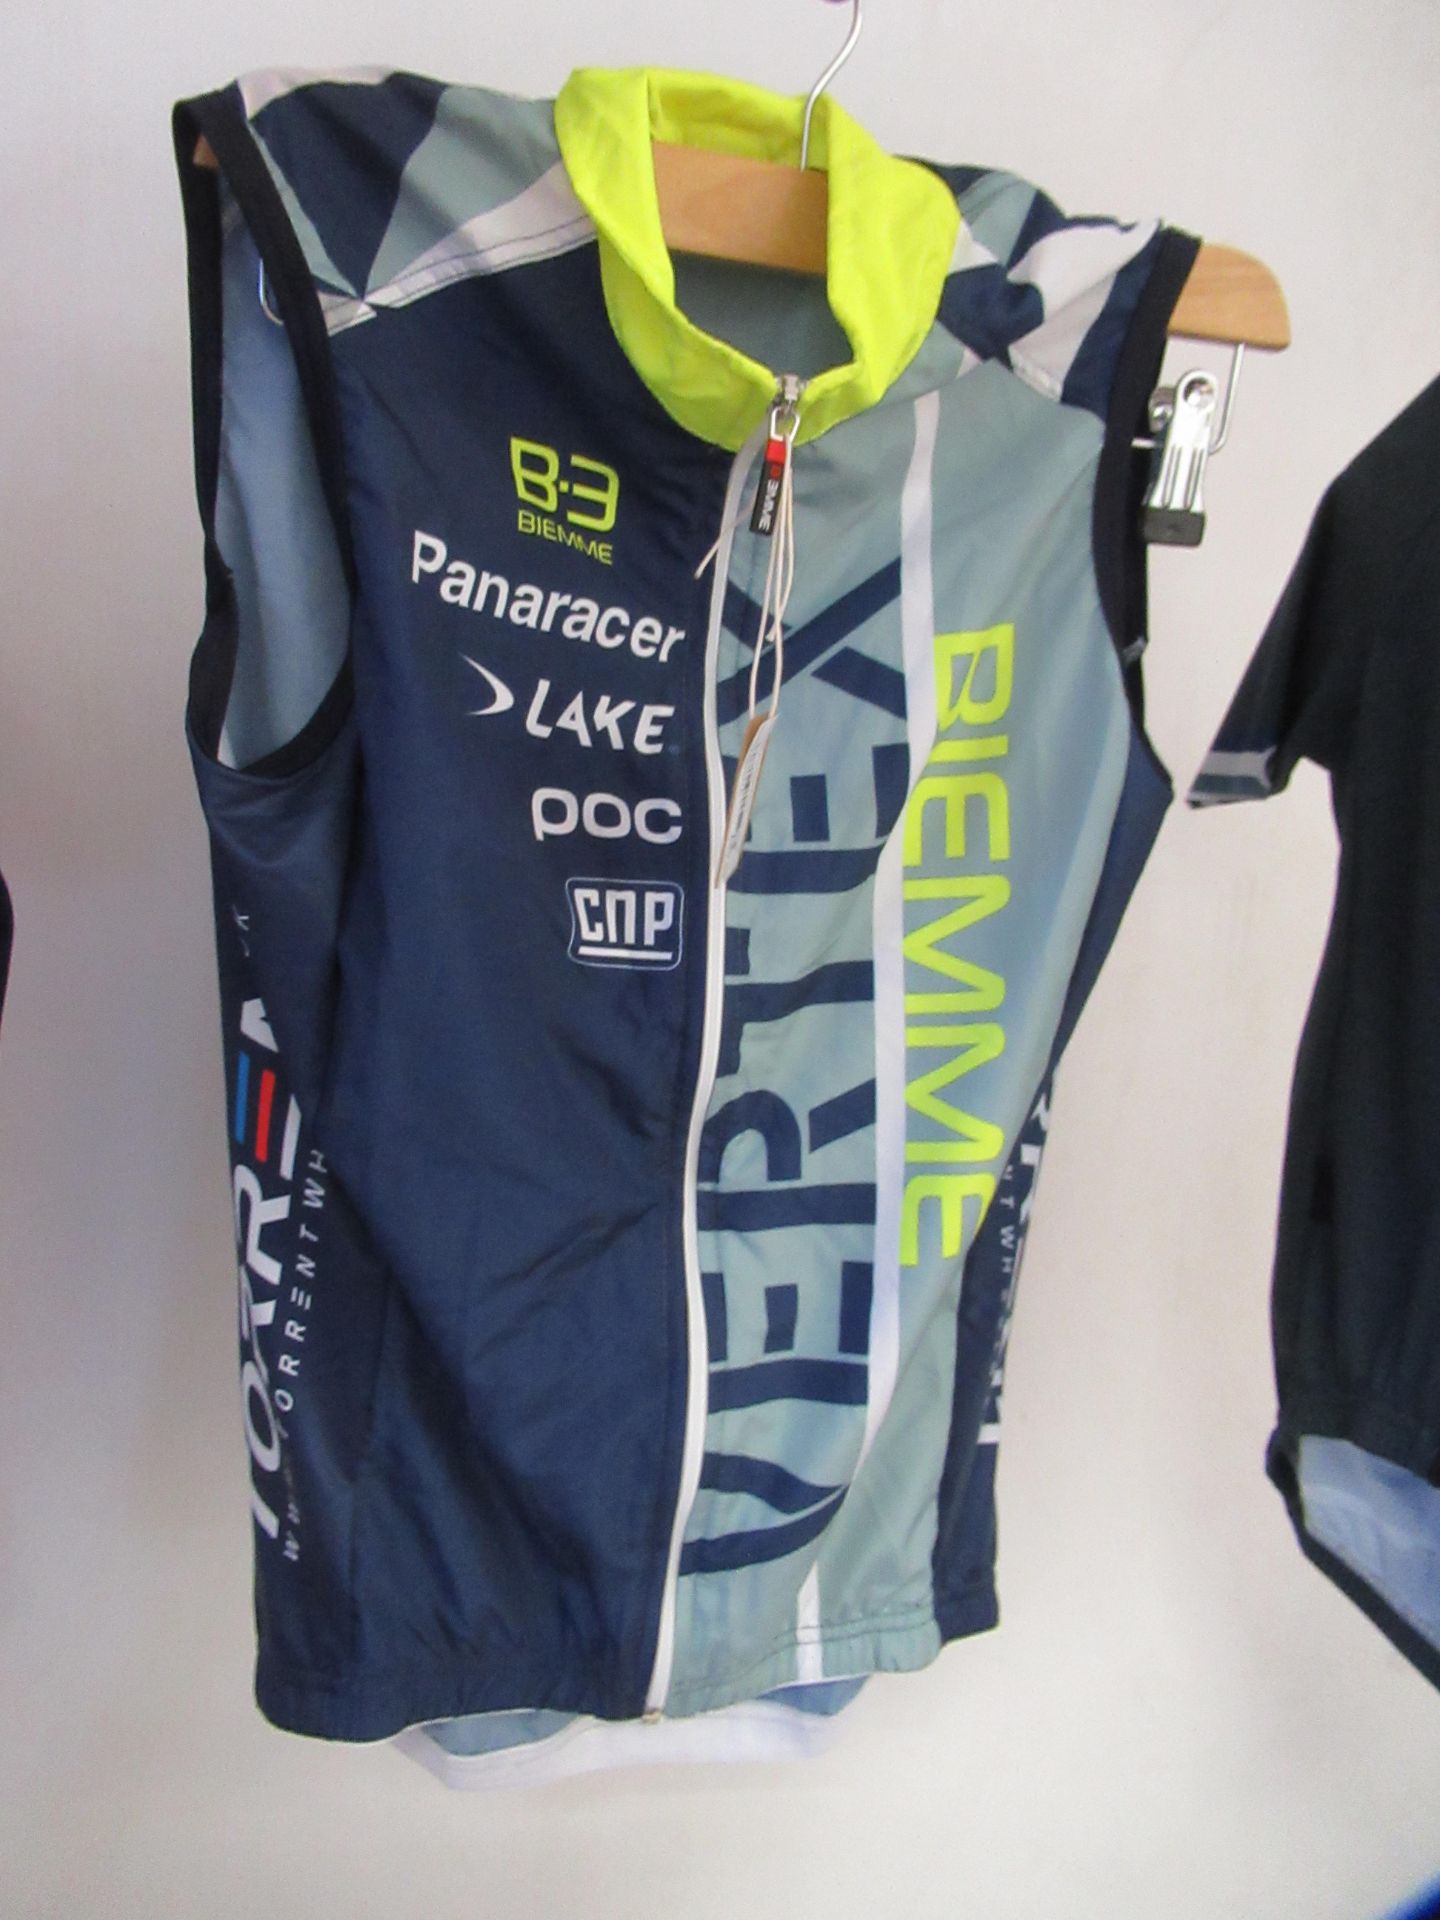 5x XS Male Cycling Clothes - Image 8 of 10